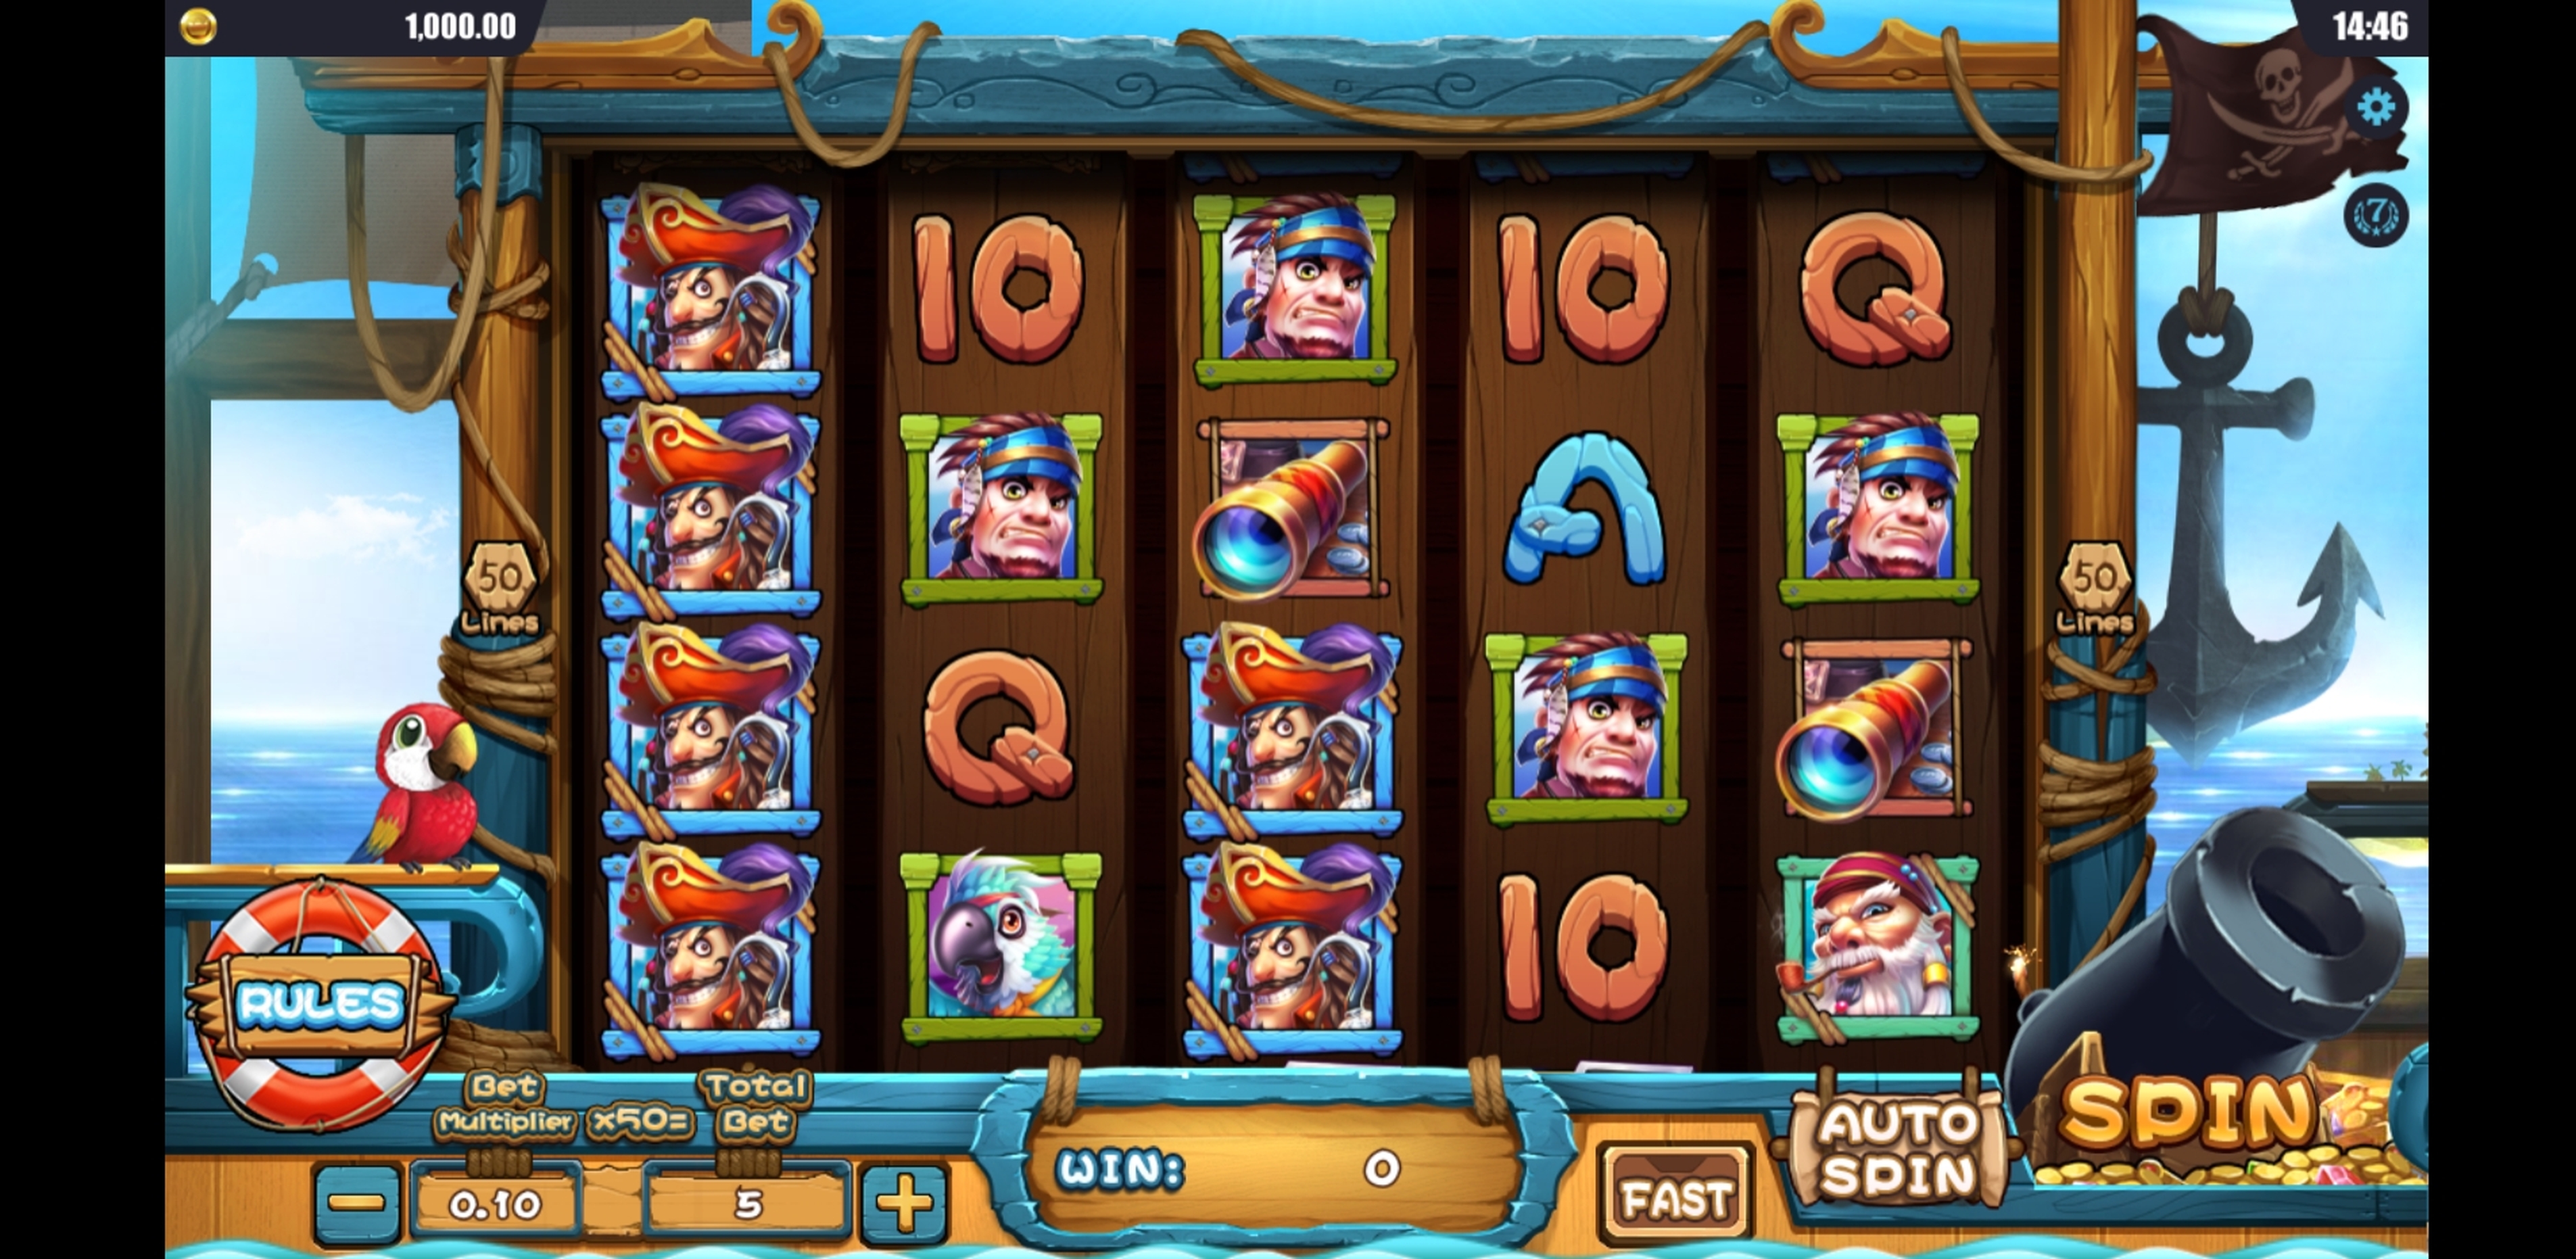 Reels in Pirate's Treasure Slot Game by Gameplay Interactive